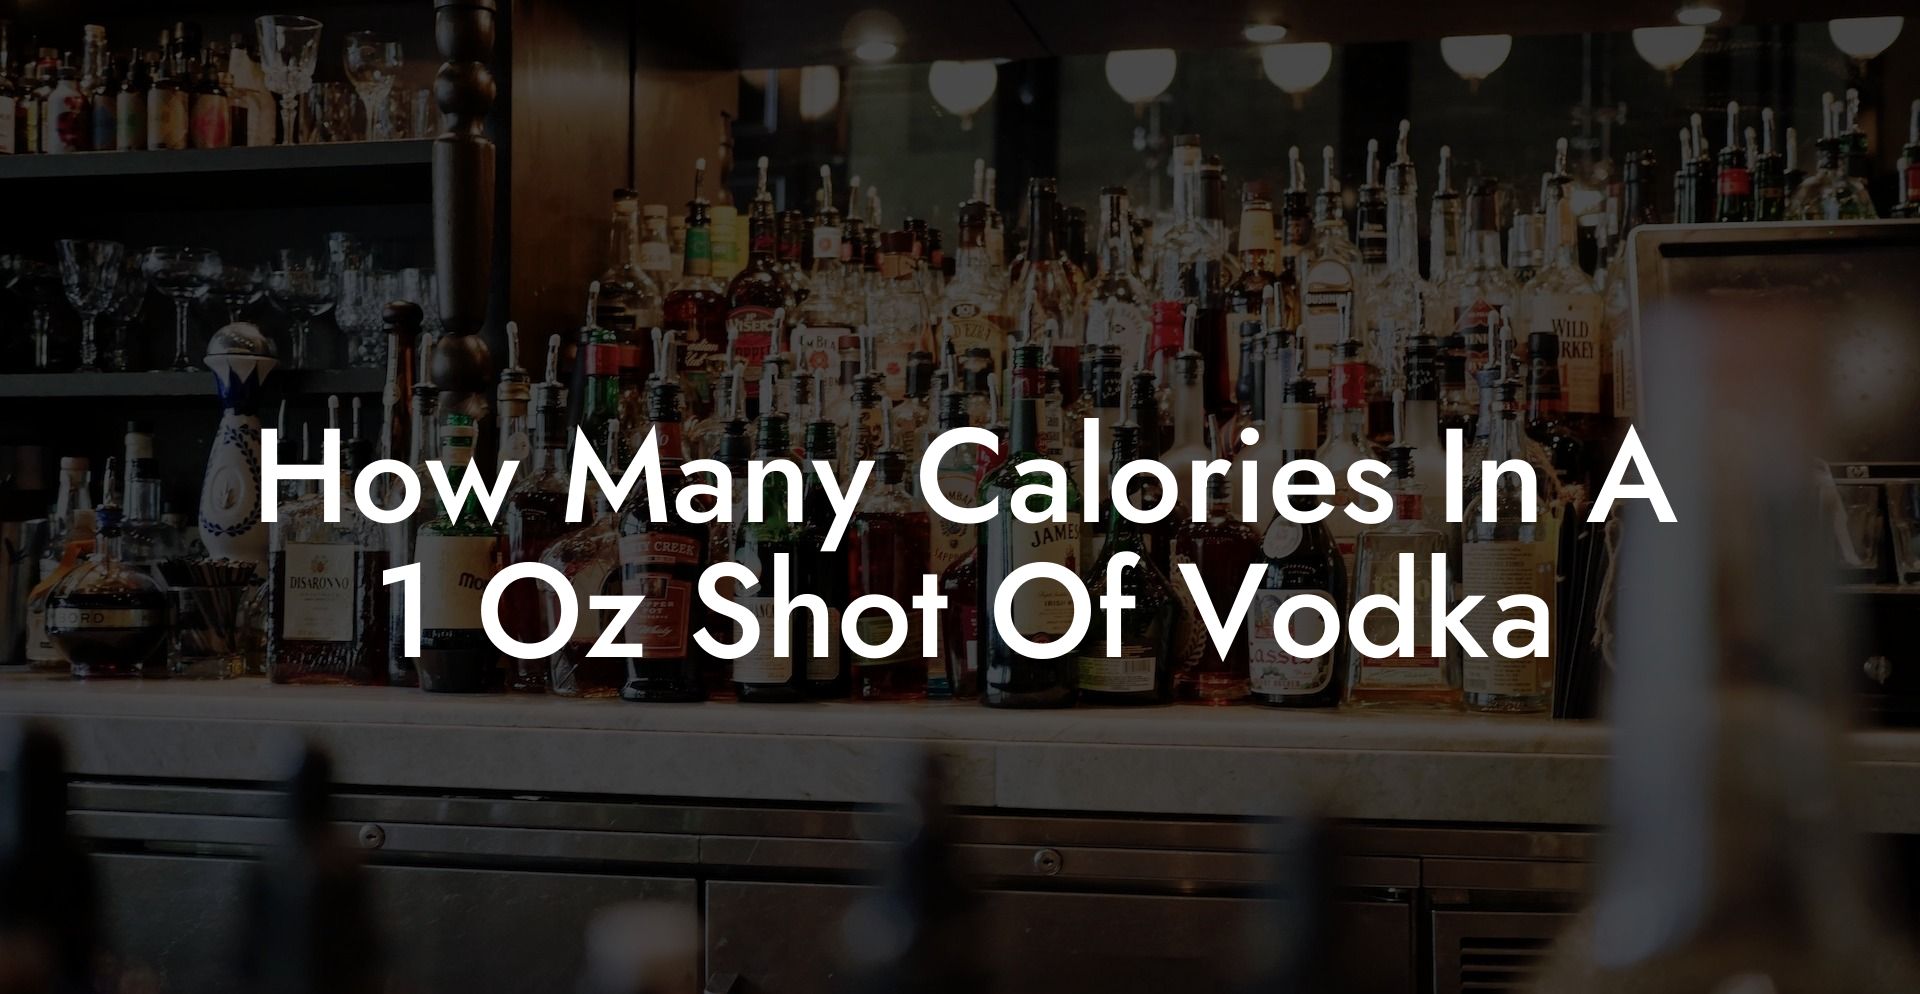 How Many Calories In A 1 Oz Shot Of Vodka